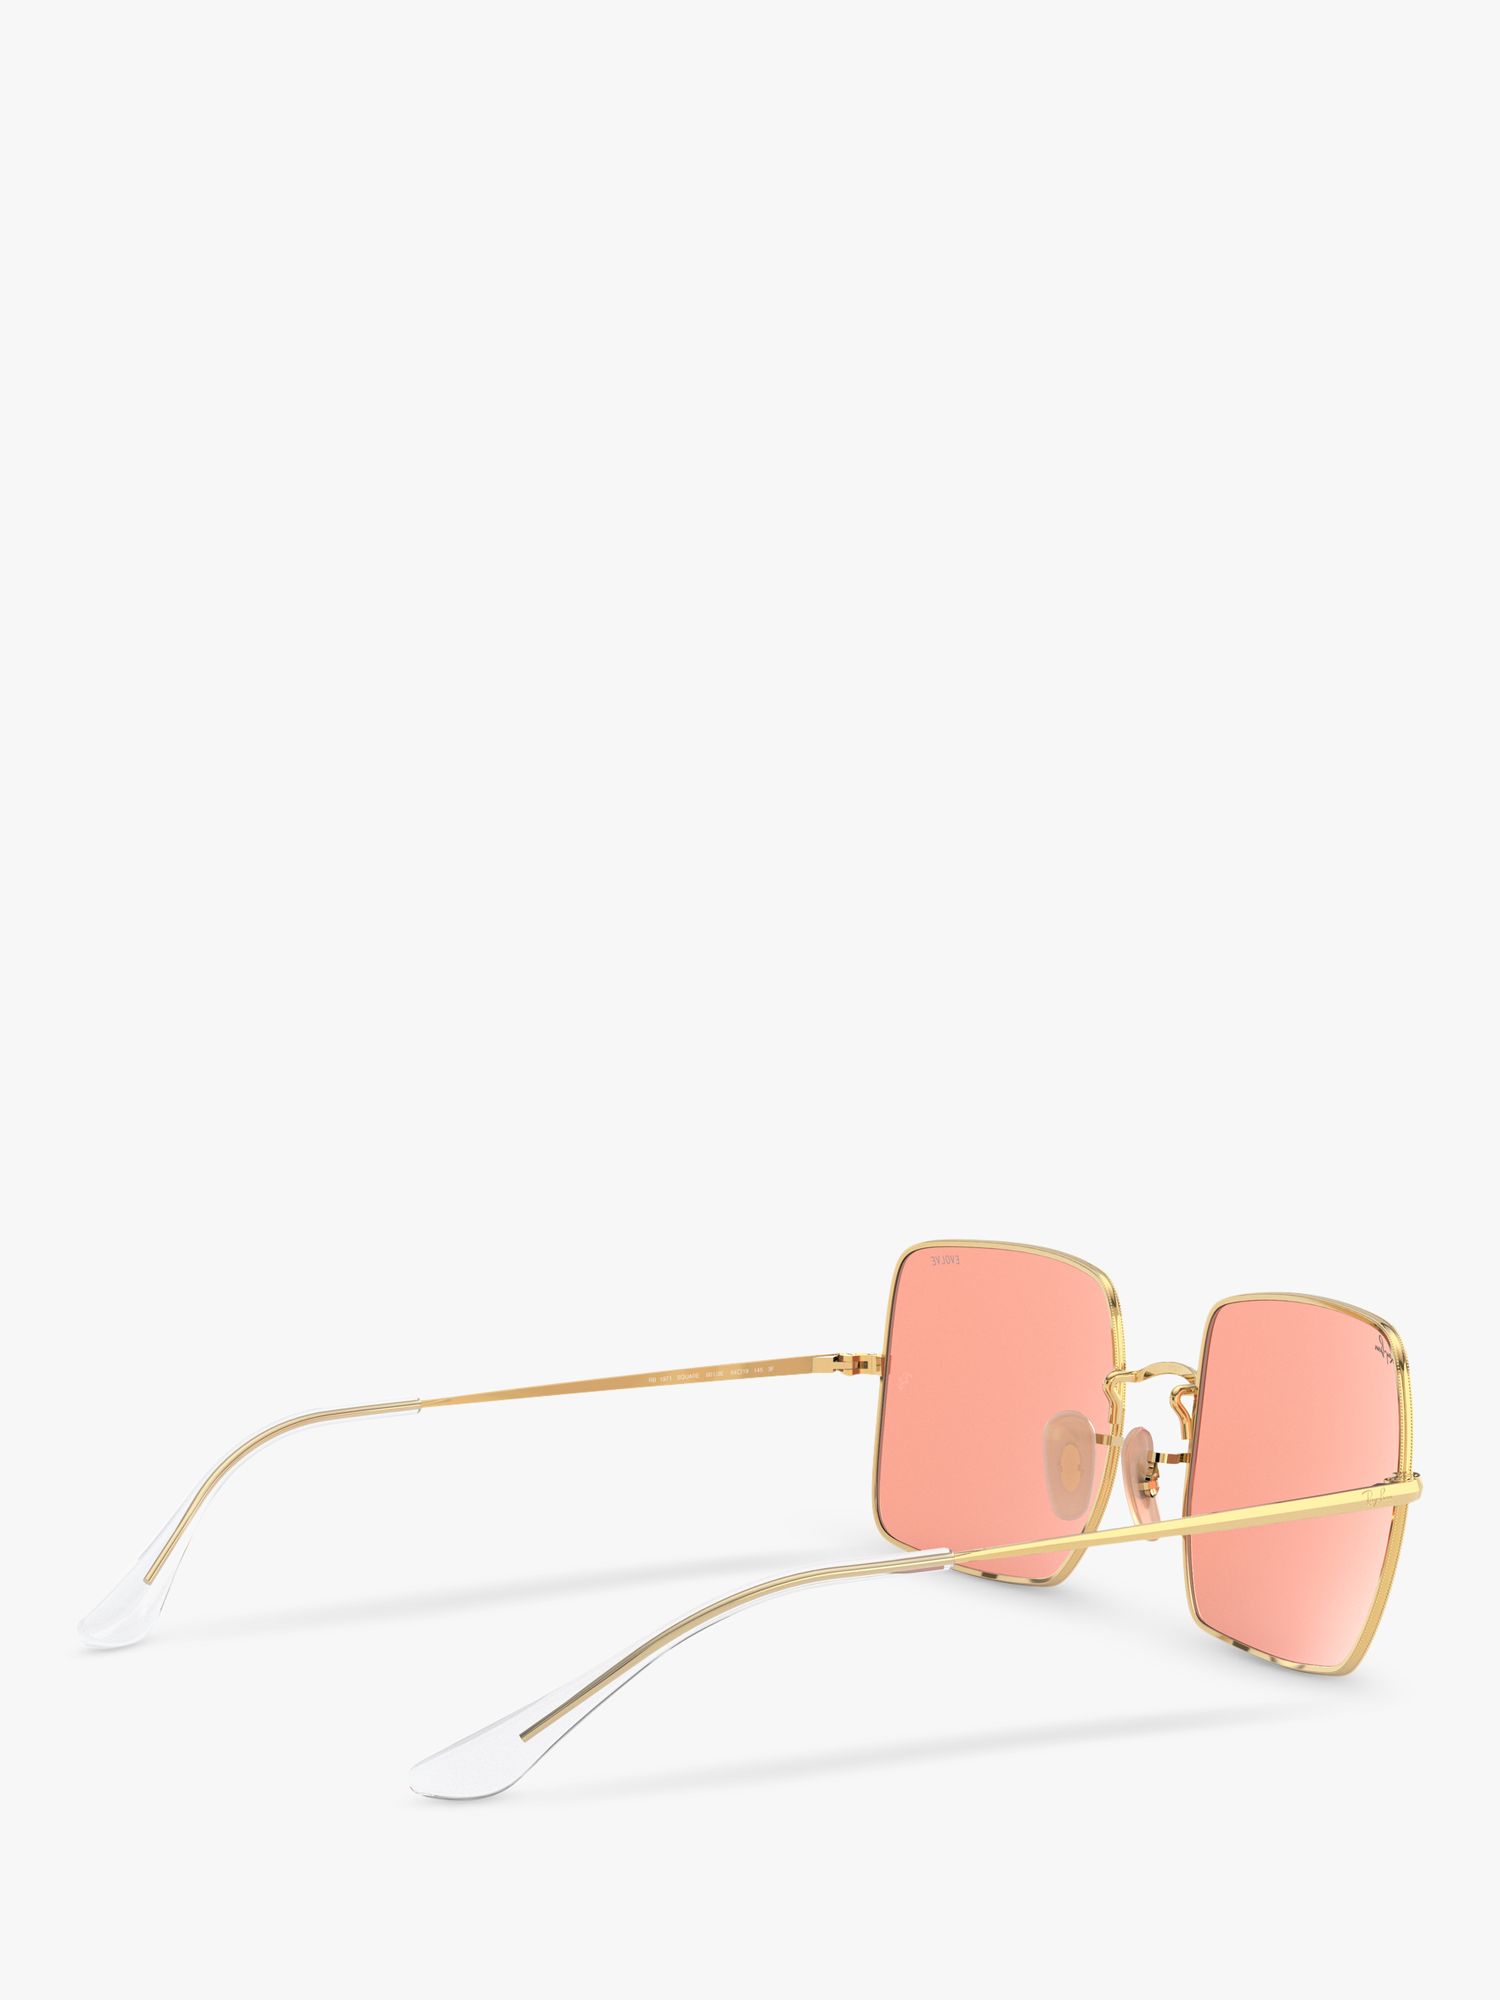 Ray-Ban RB1971 Unisex Square Sunglasses, Gold/Pink